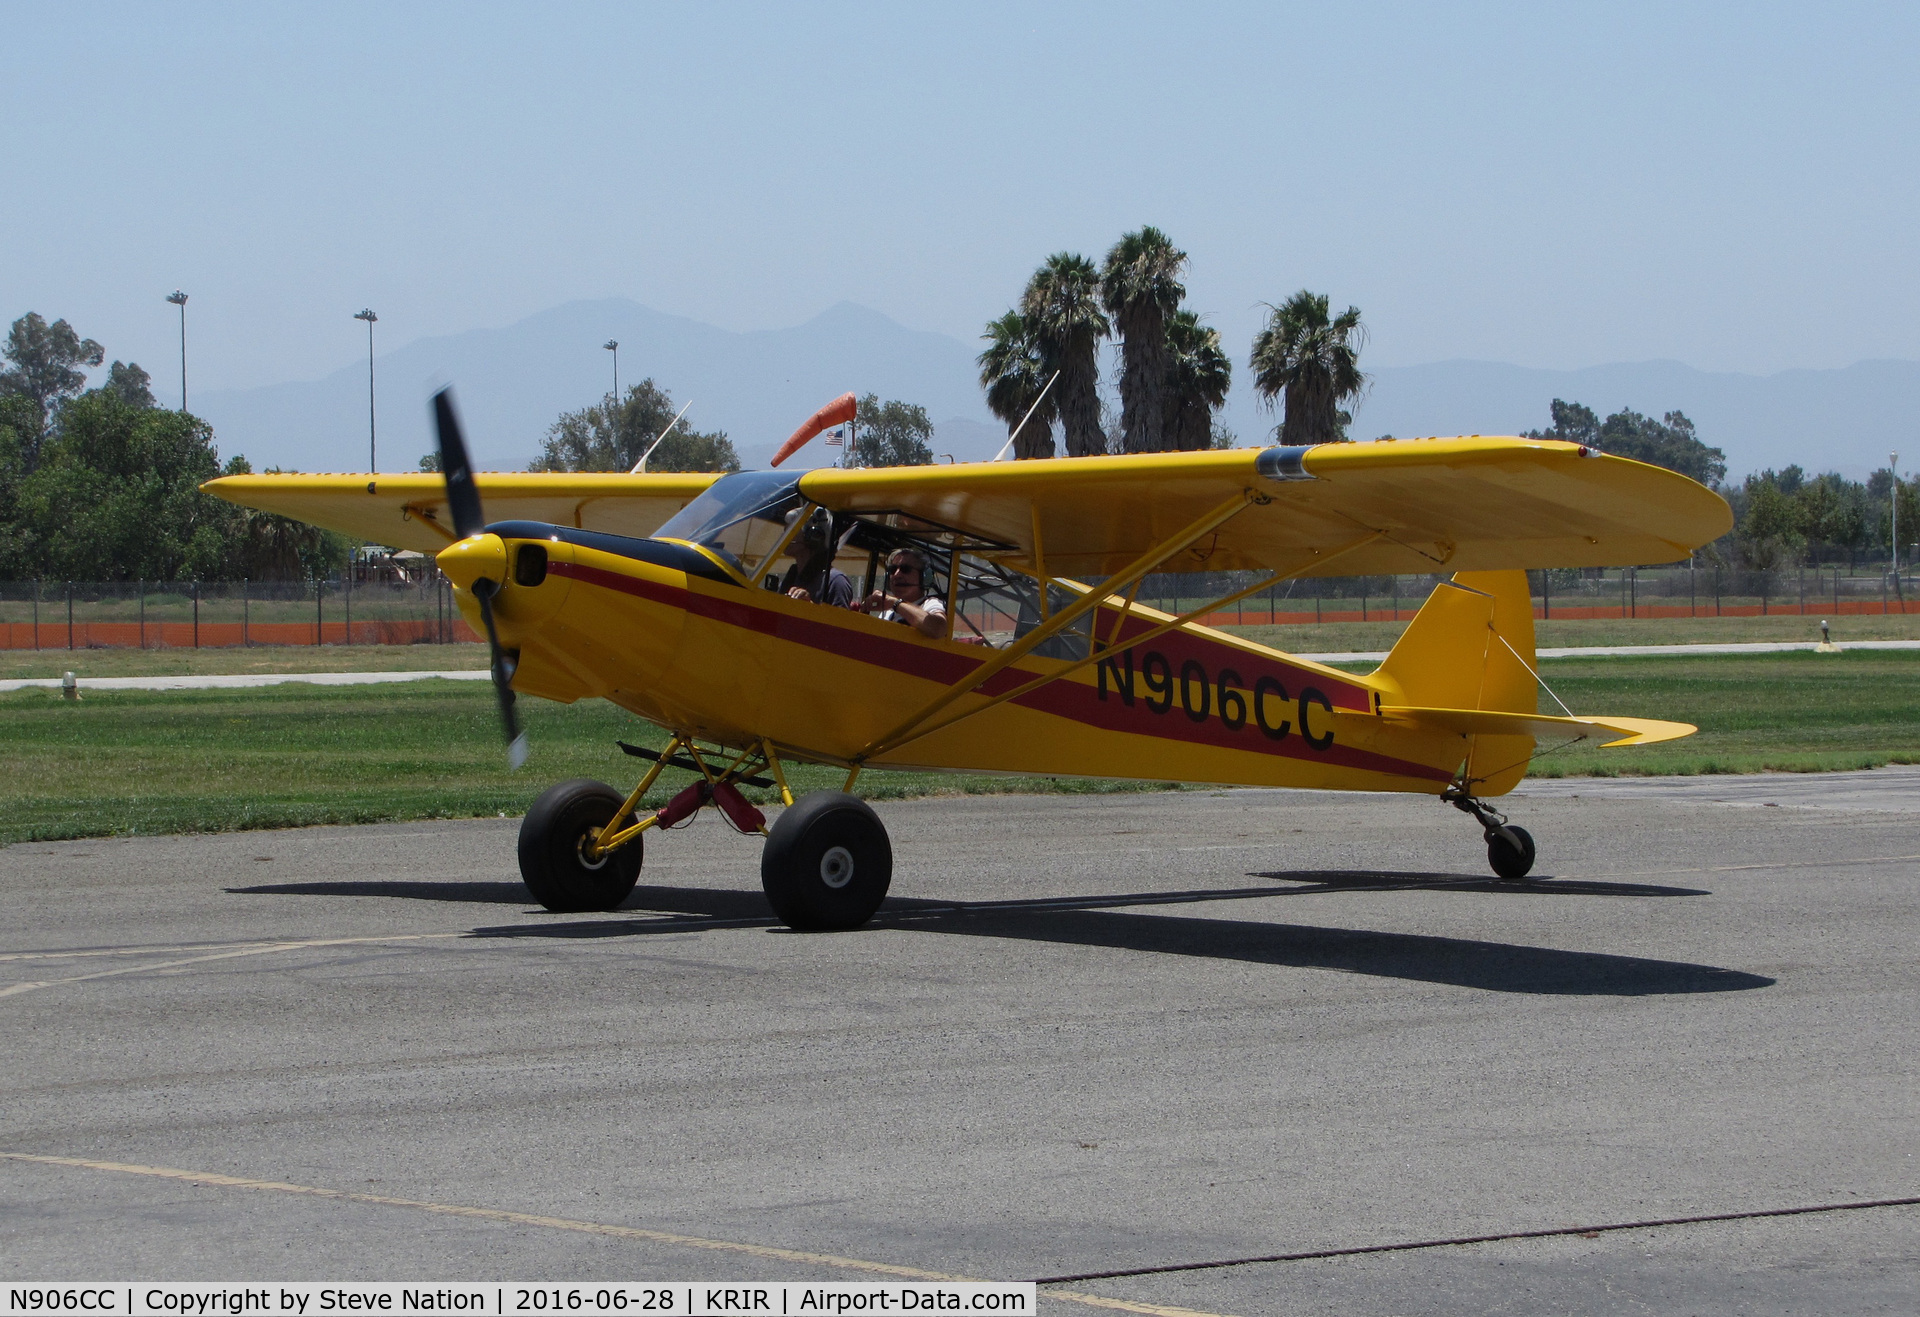 N906CC, 2001 Piper/cub Crafters PA-18-150 C/N 9924CC, 2001 Piper Cub Crafters PA-18-150 taxiing for take-off @ Flabob Airport, Riverside, CA